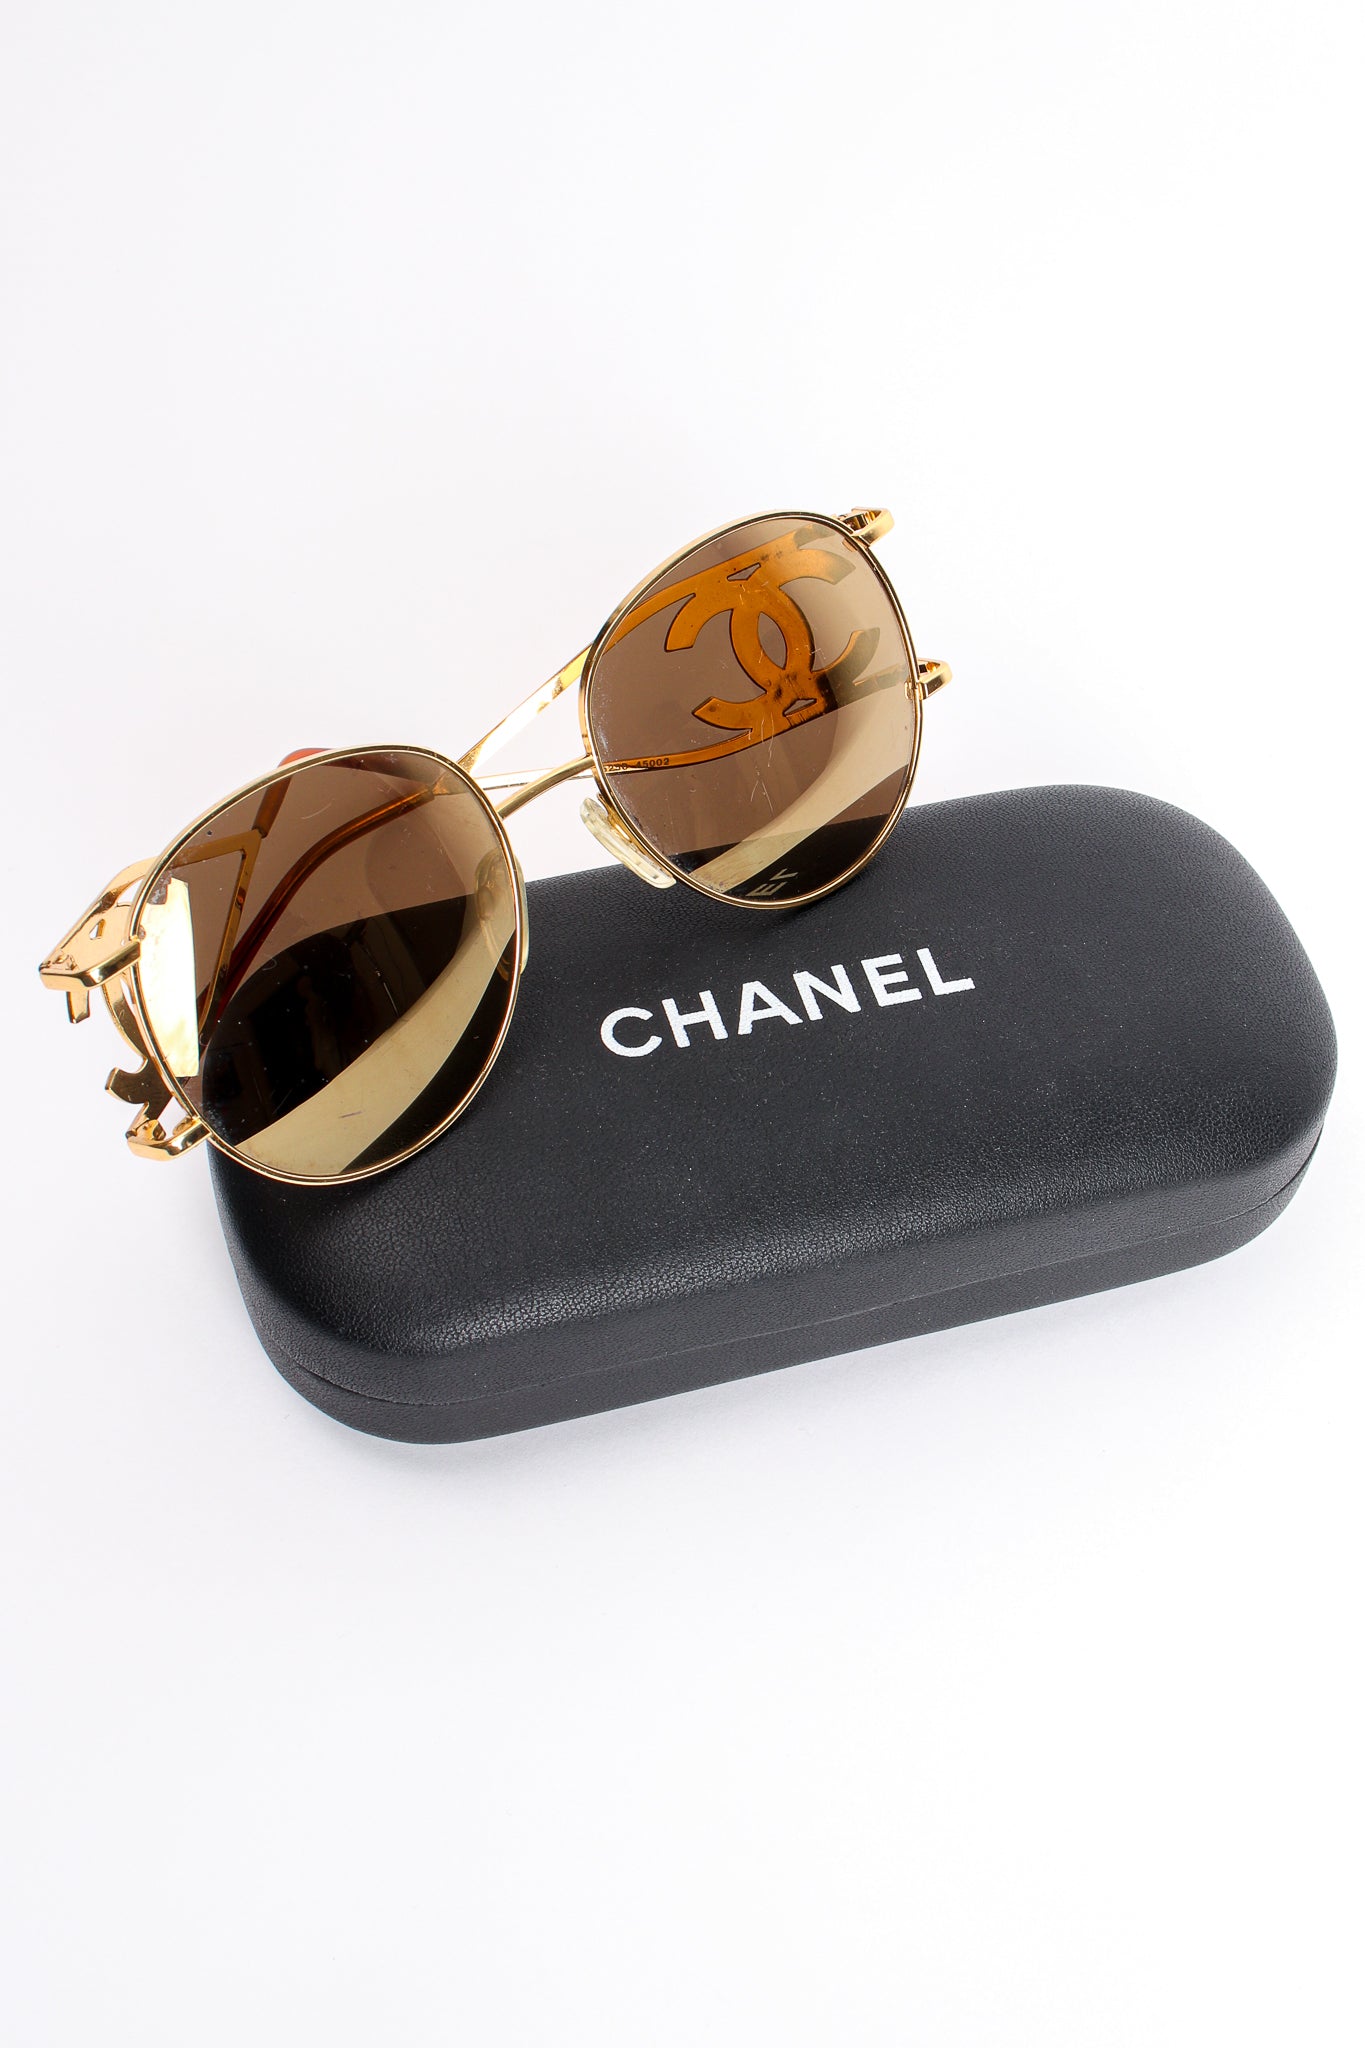 CHANEL RECTANGLE SUNGLASSES WITH CC RHINESTONES IN GOLD 4104b